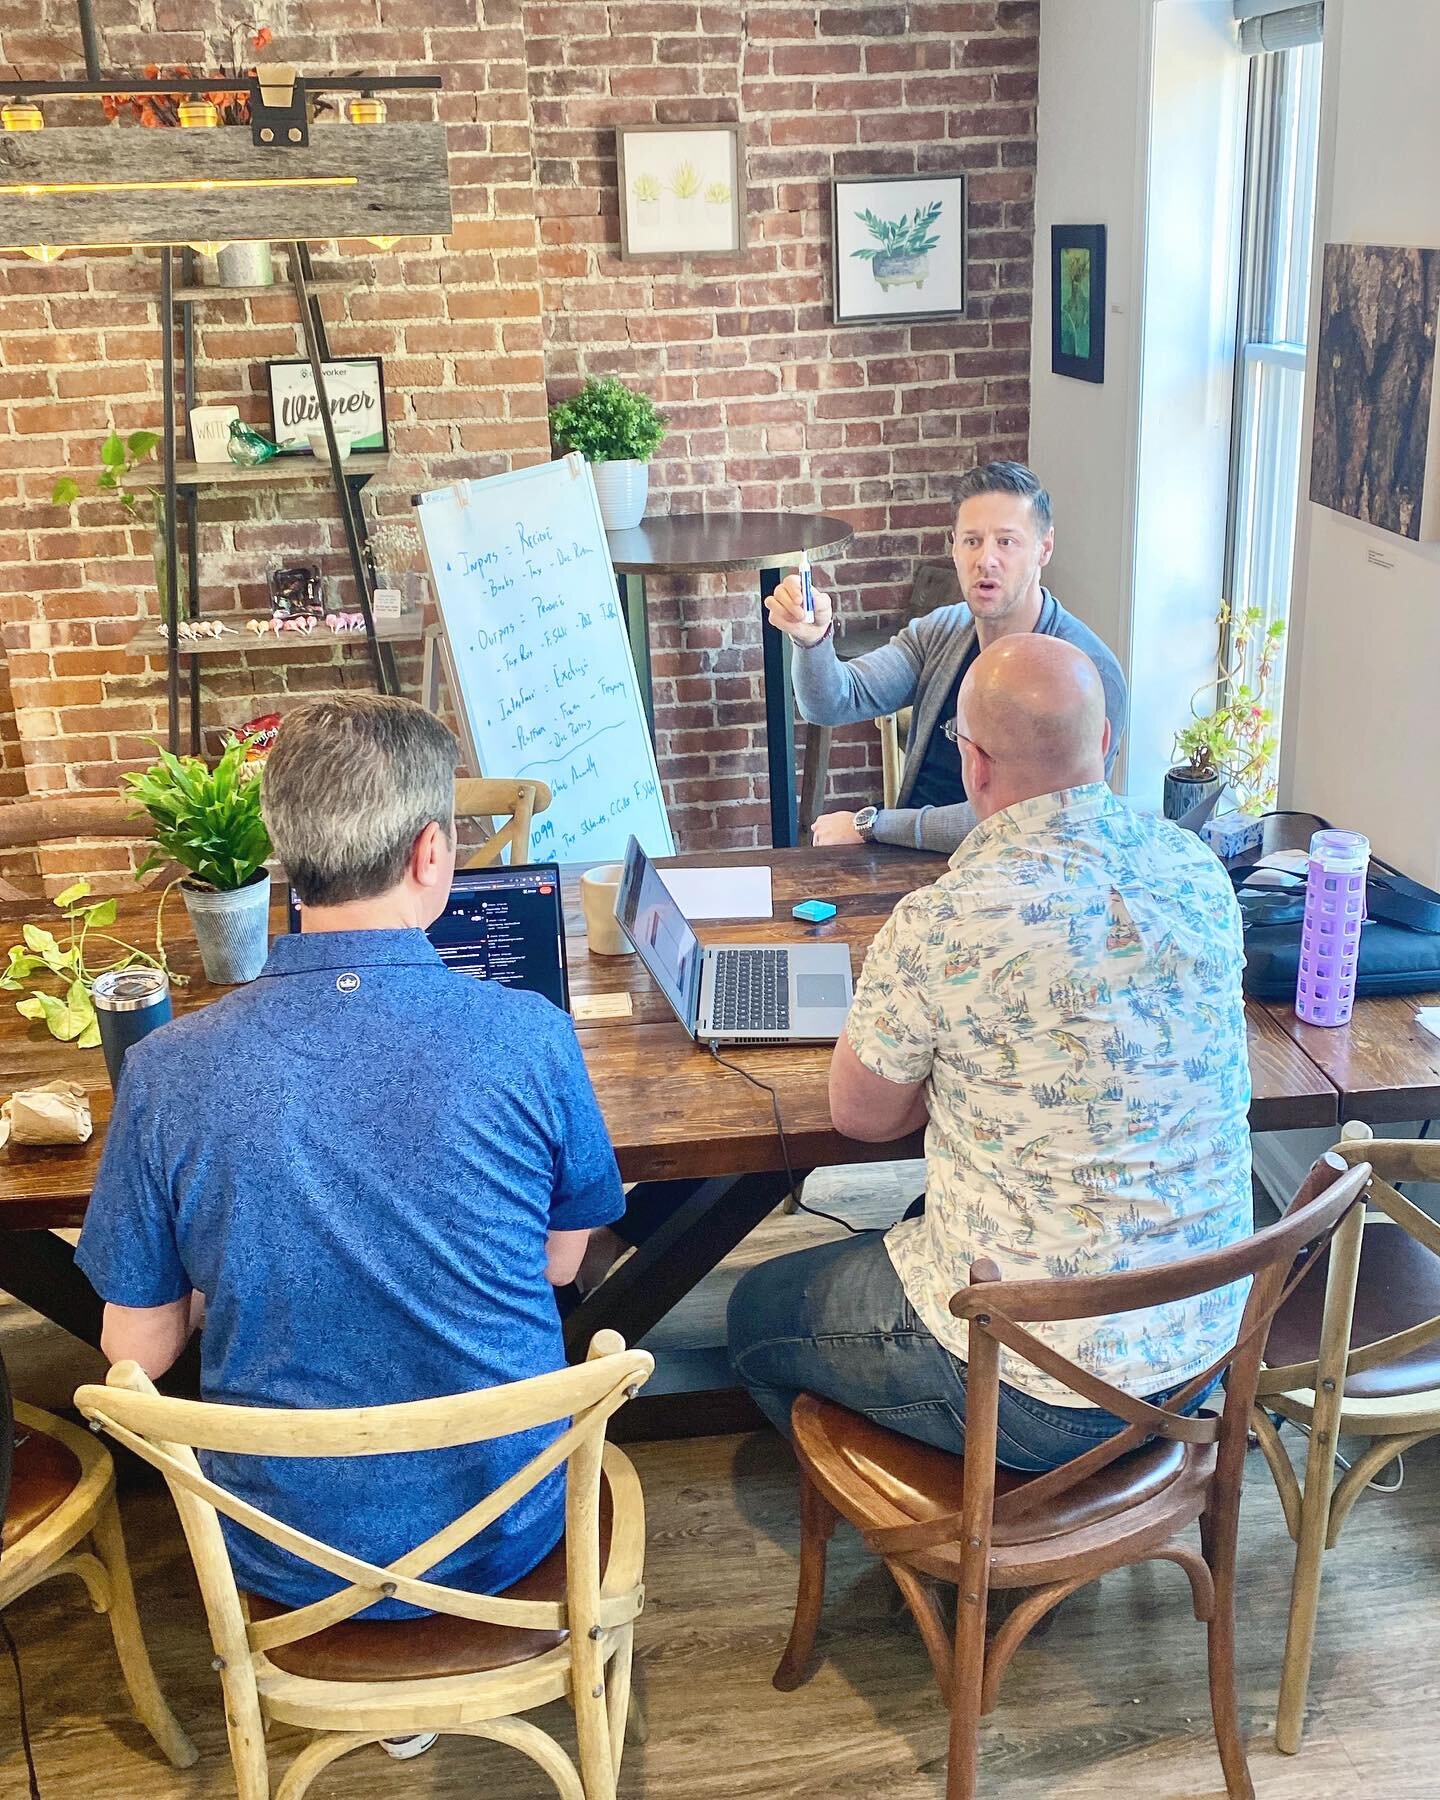 Our creative workspaces fuel collaboration and creativity! Ask us about our special deals on Open Desk Memberships or Day Pass Packages! #Coworking #MorristownNJ #DayPass #CreativeSpacs